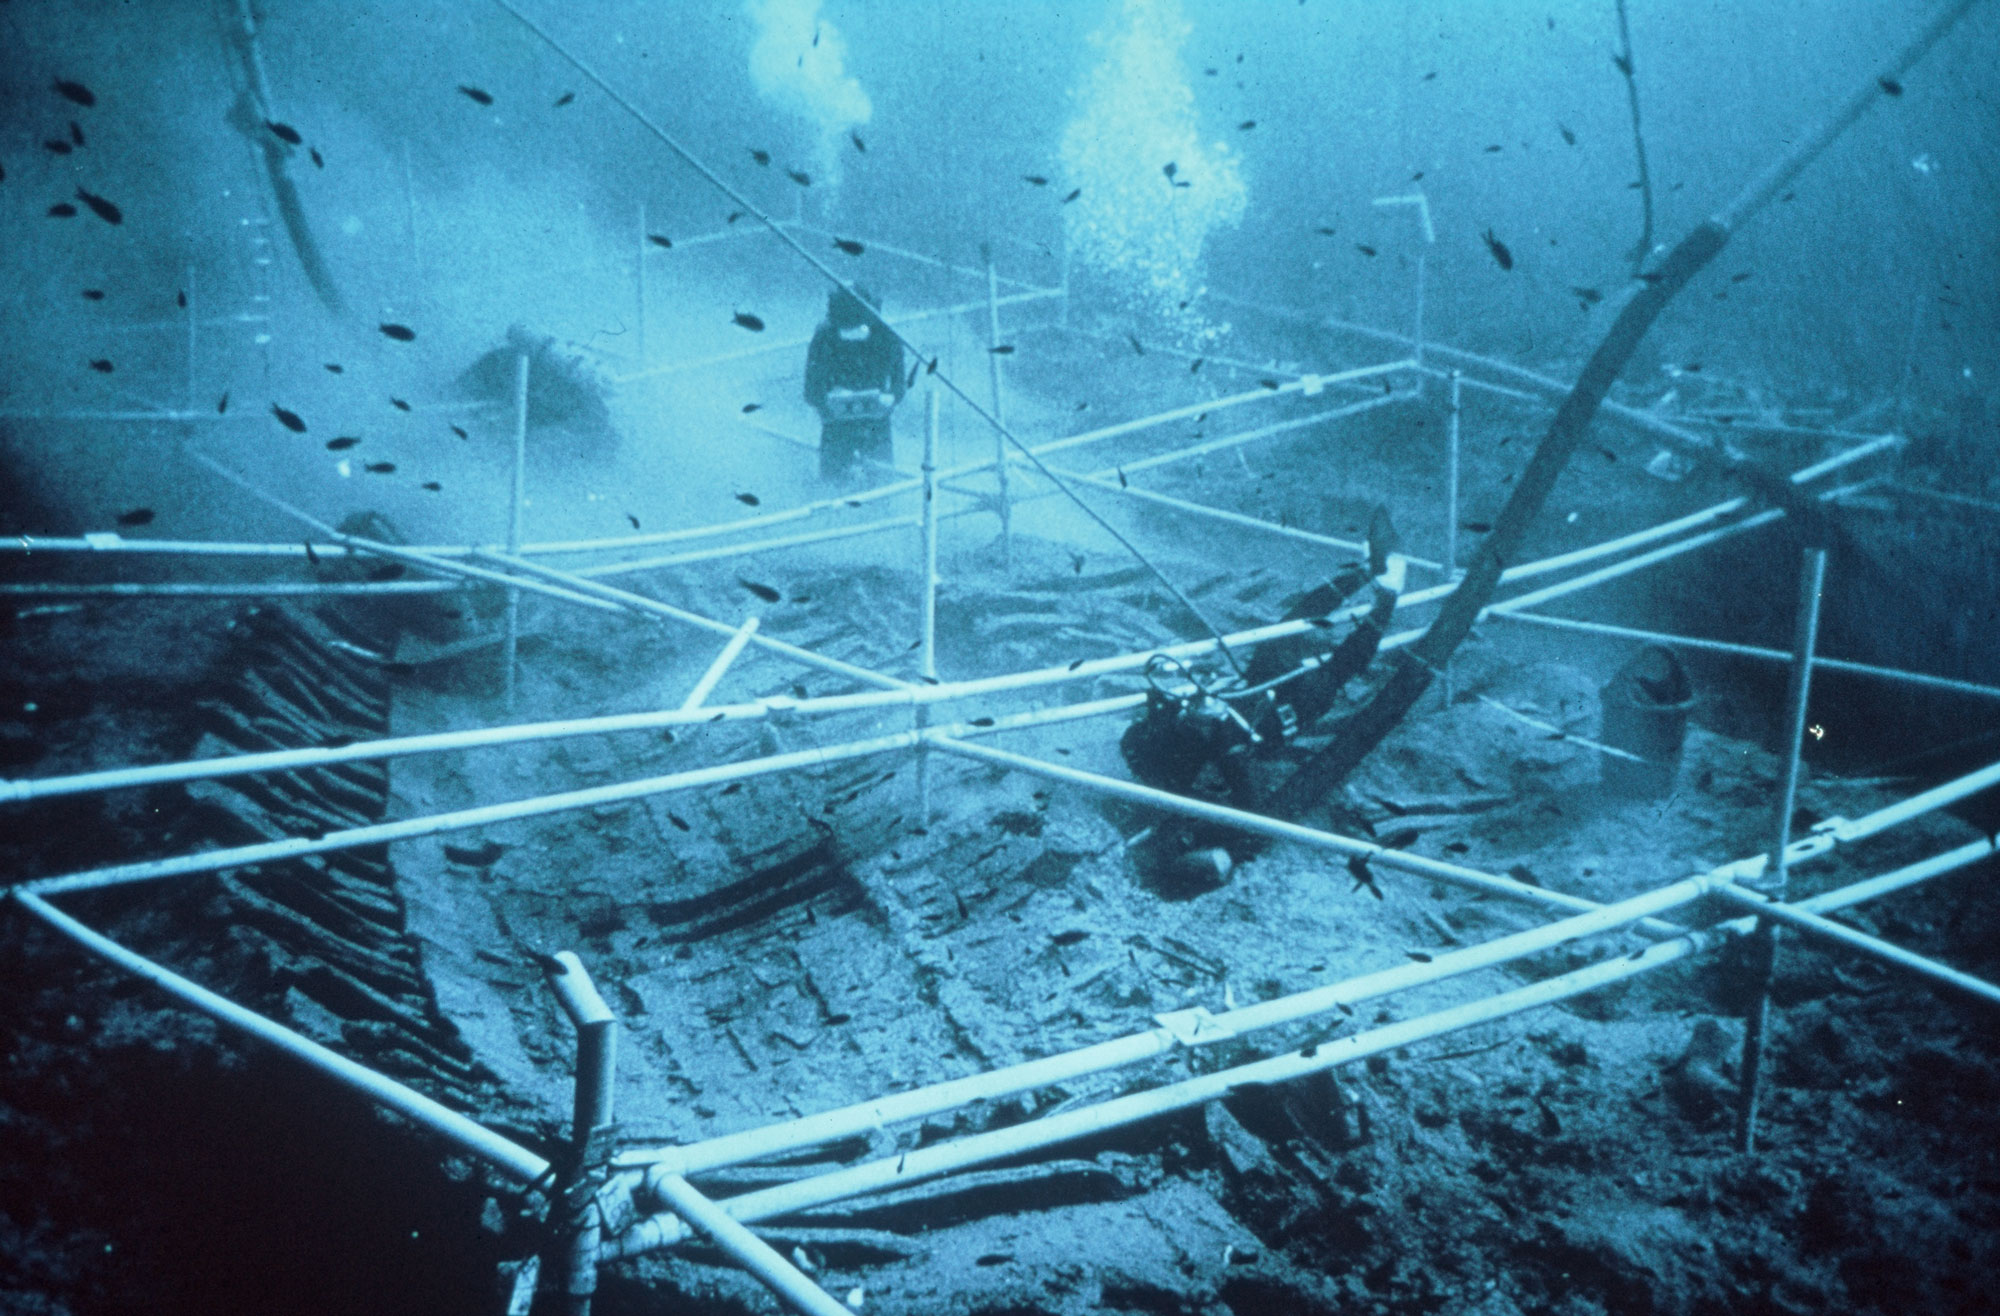 Kyrenia wreck during excavation in the 1960s